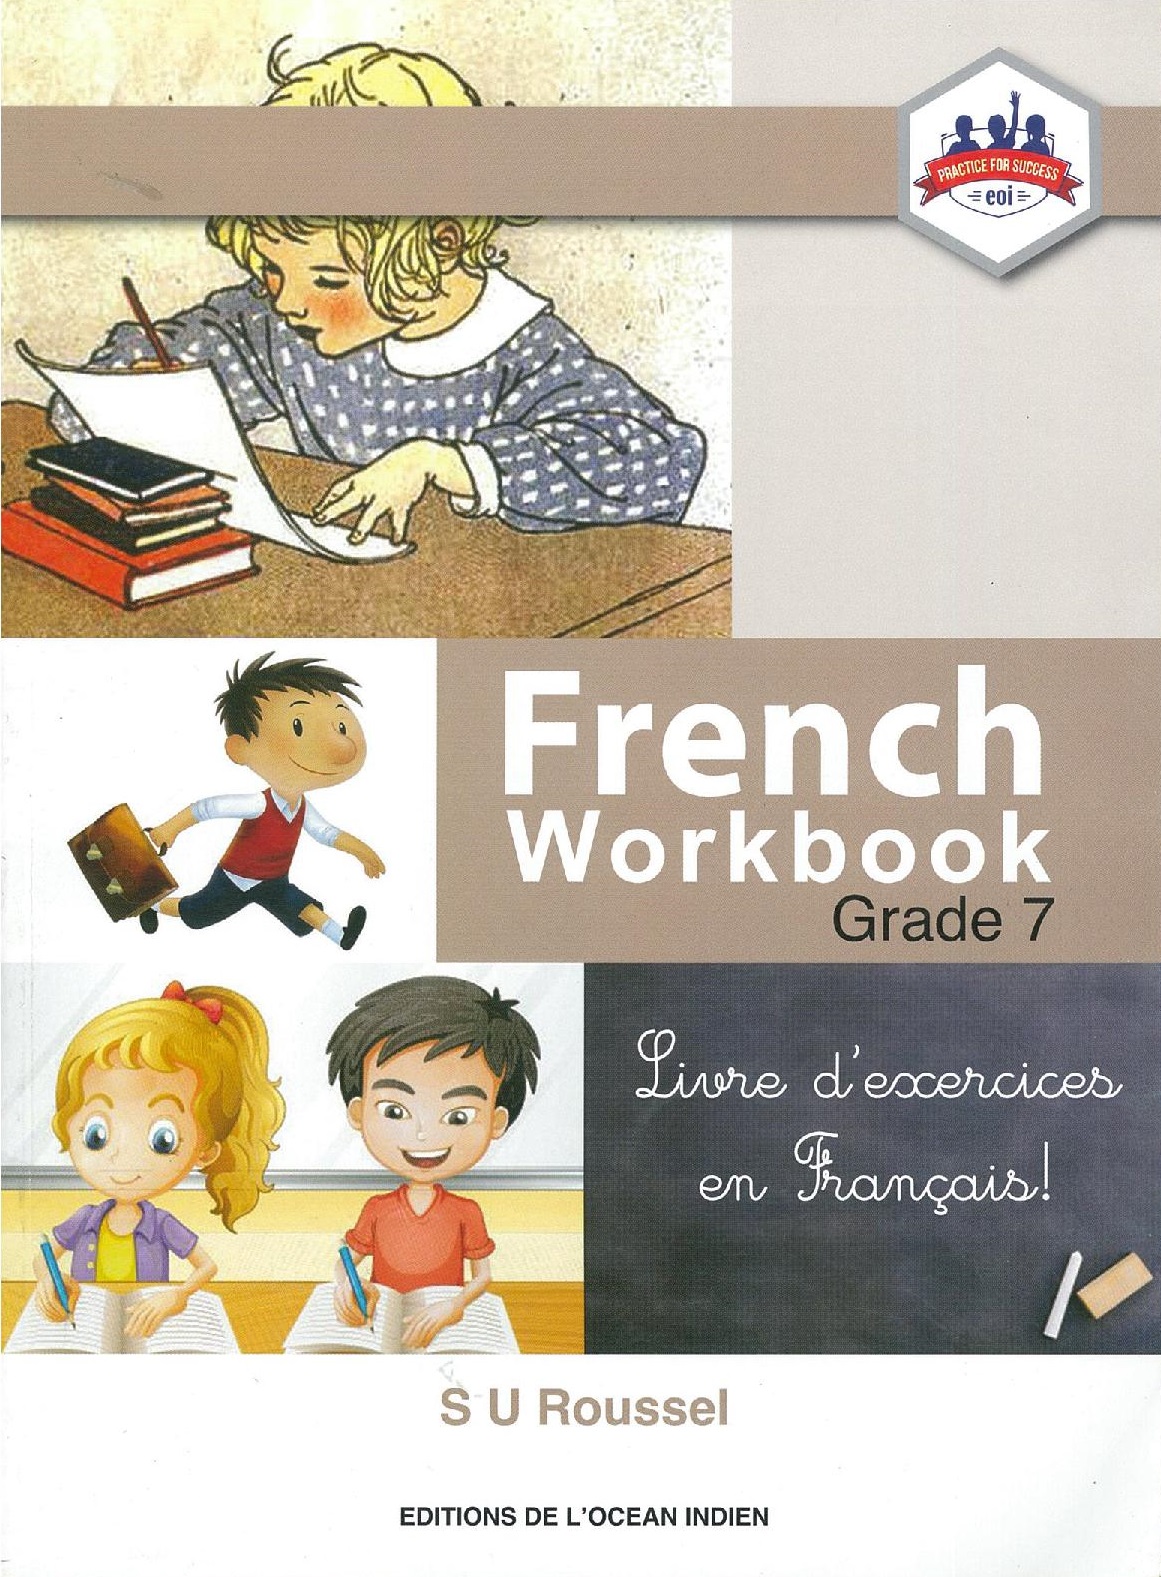 FRENCH WORKBOOK GRADE 7 - ROUSSEL